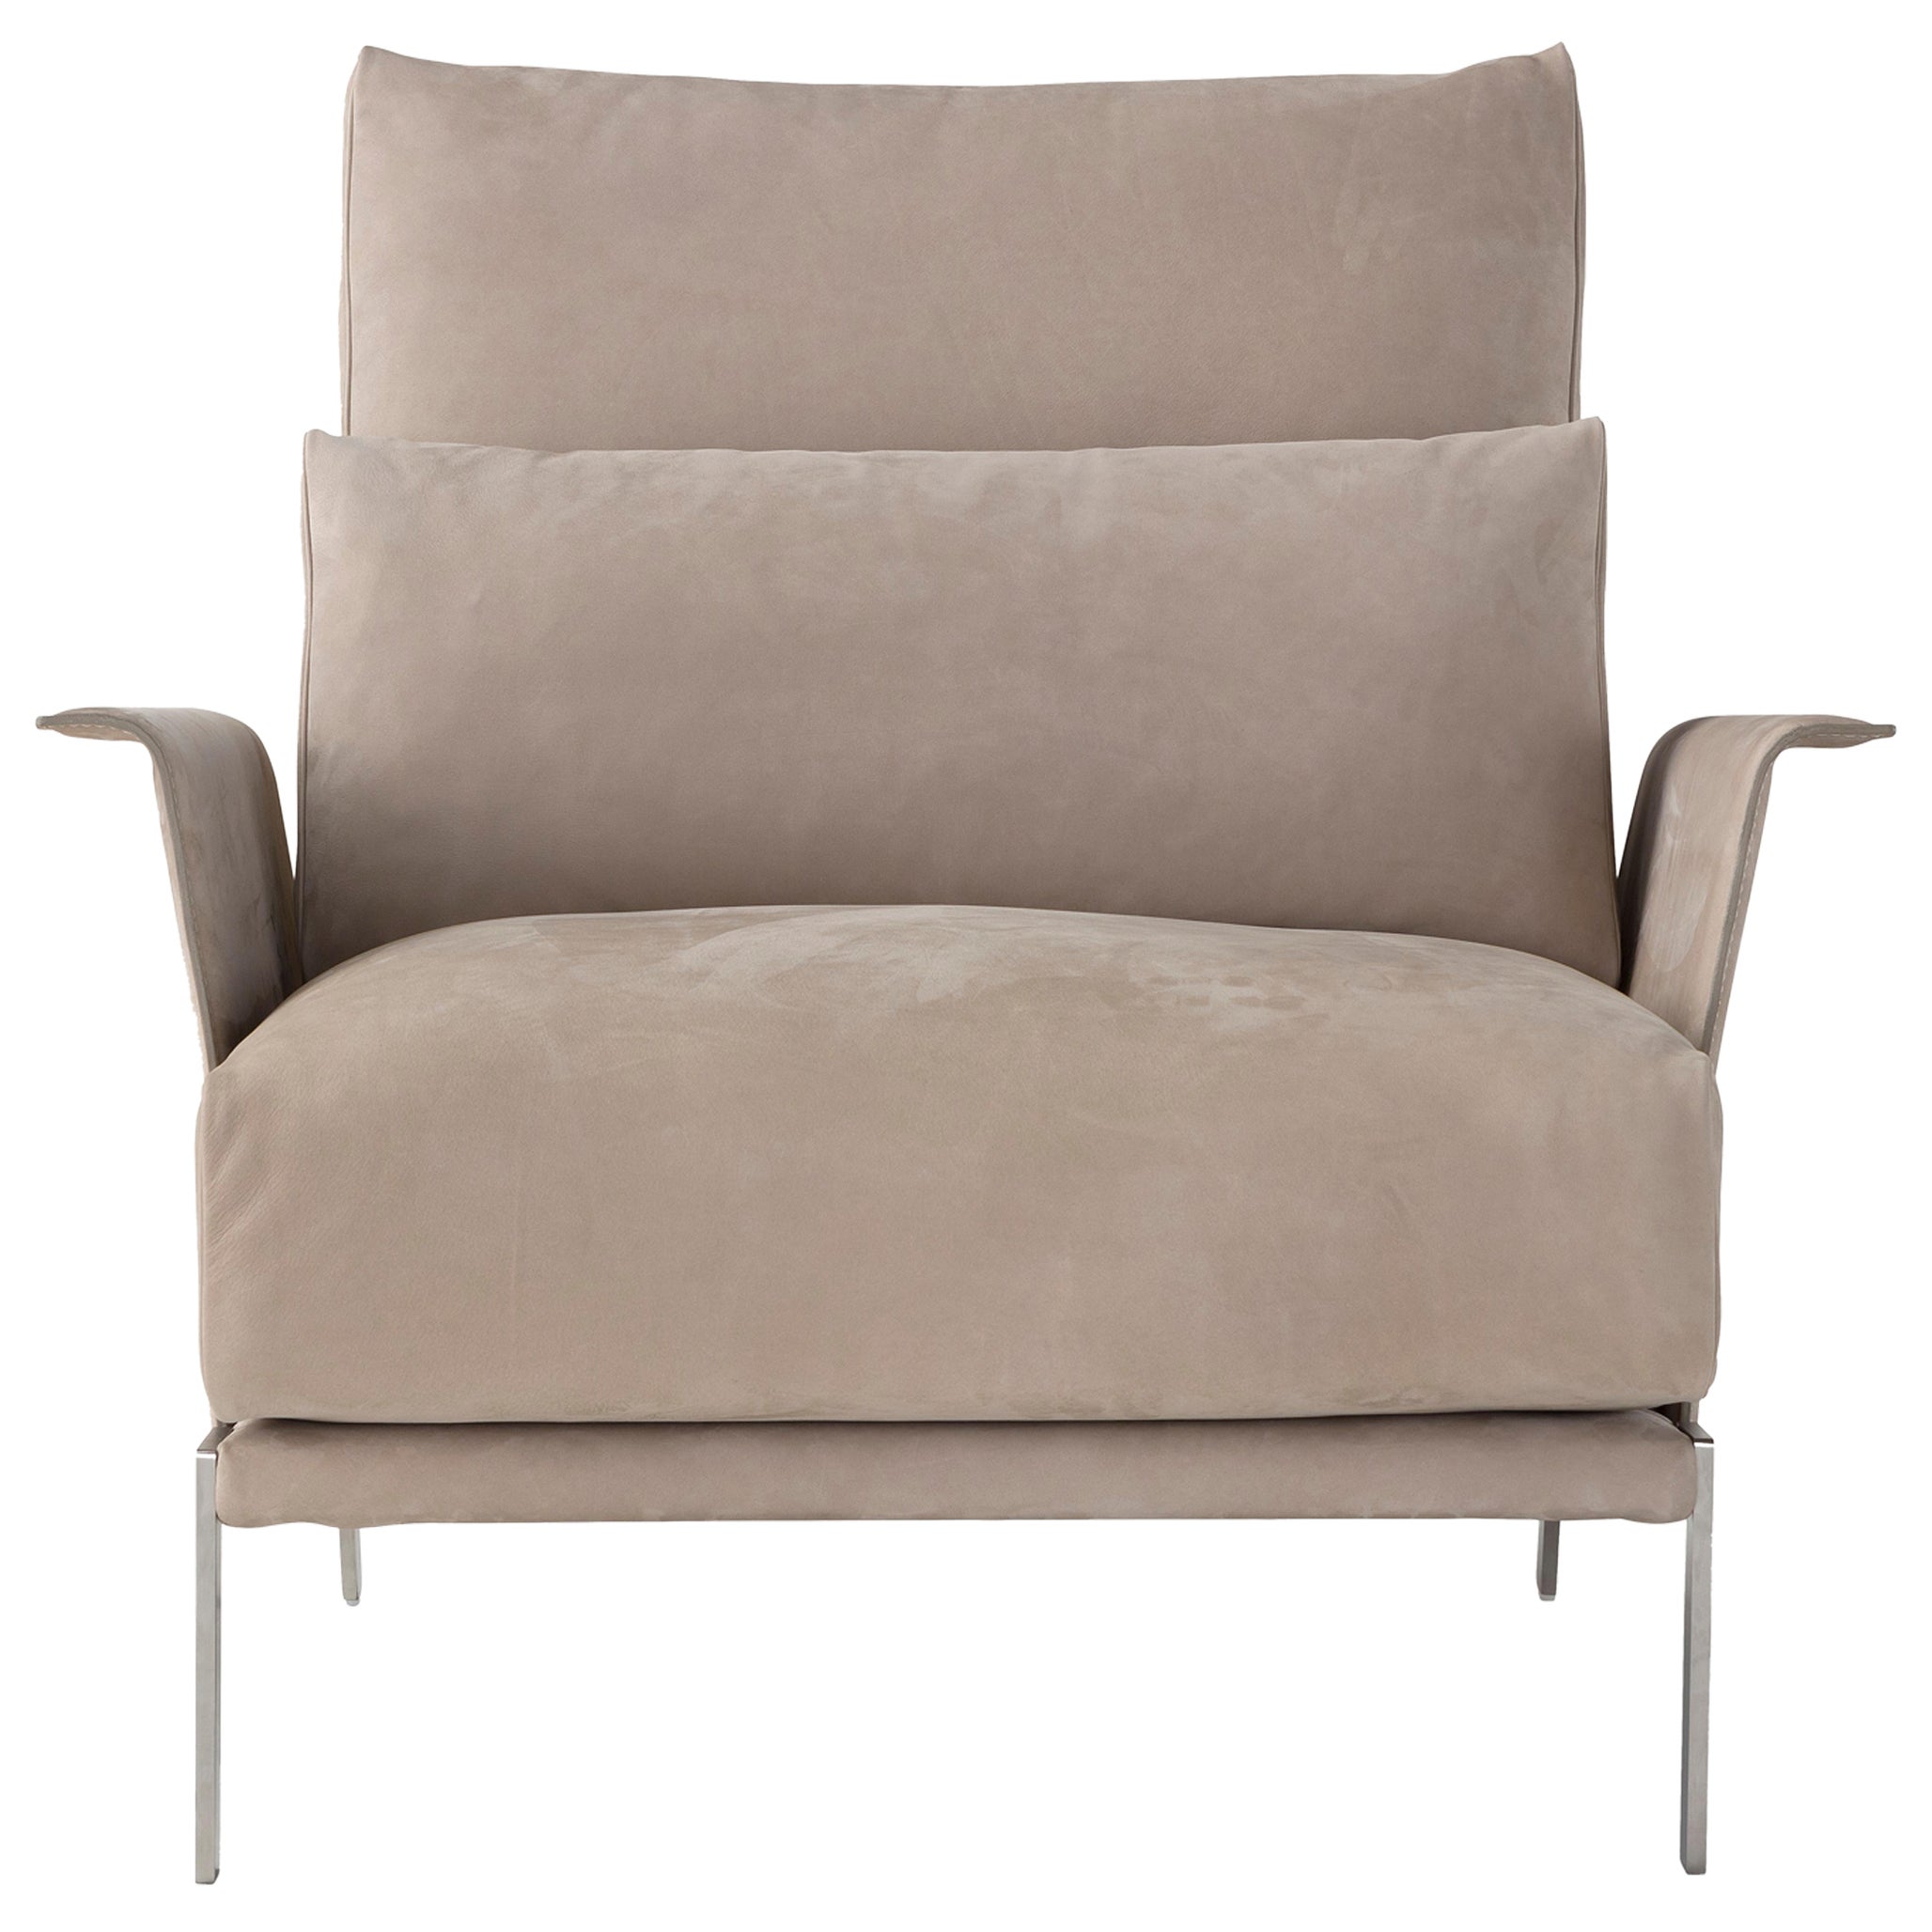 Amura "New Link" Armchair in Tan Leather by Marconato & Zappa For Sale